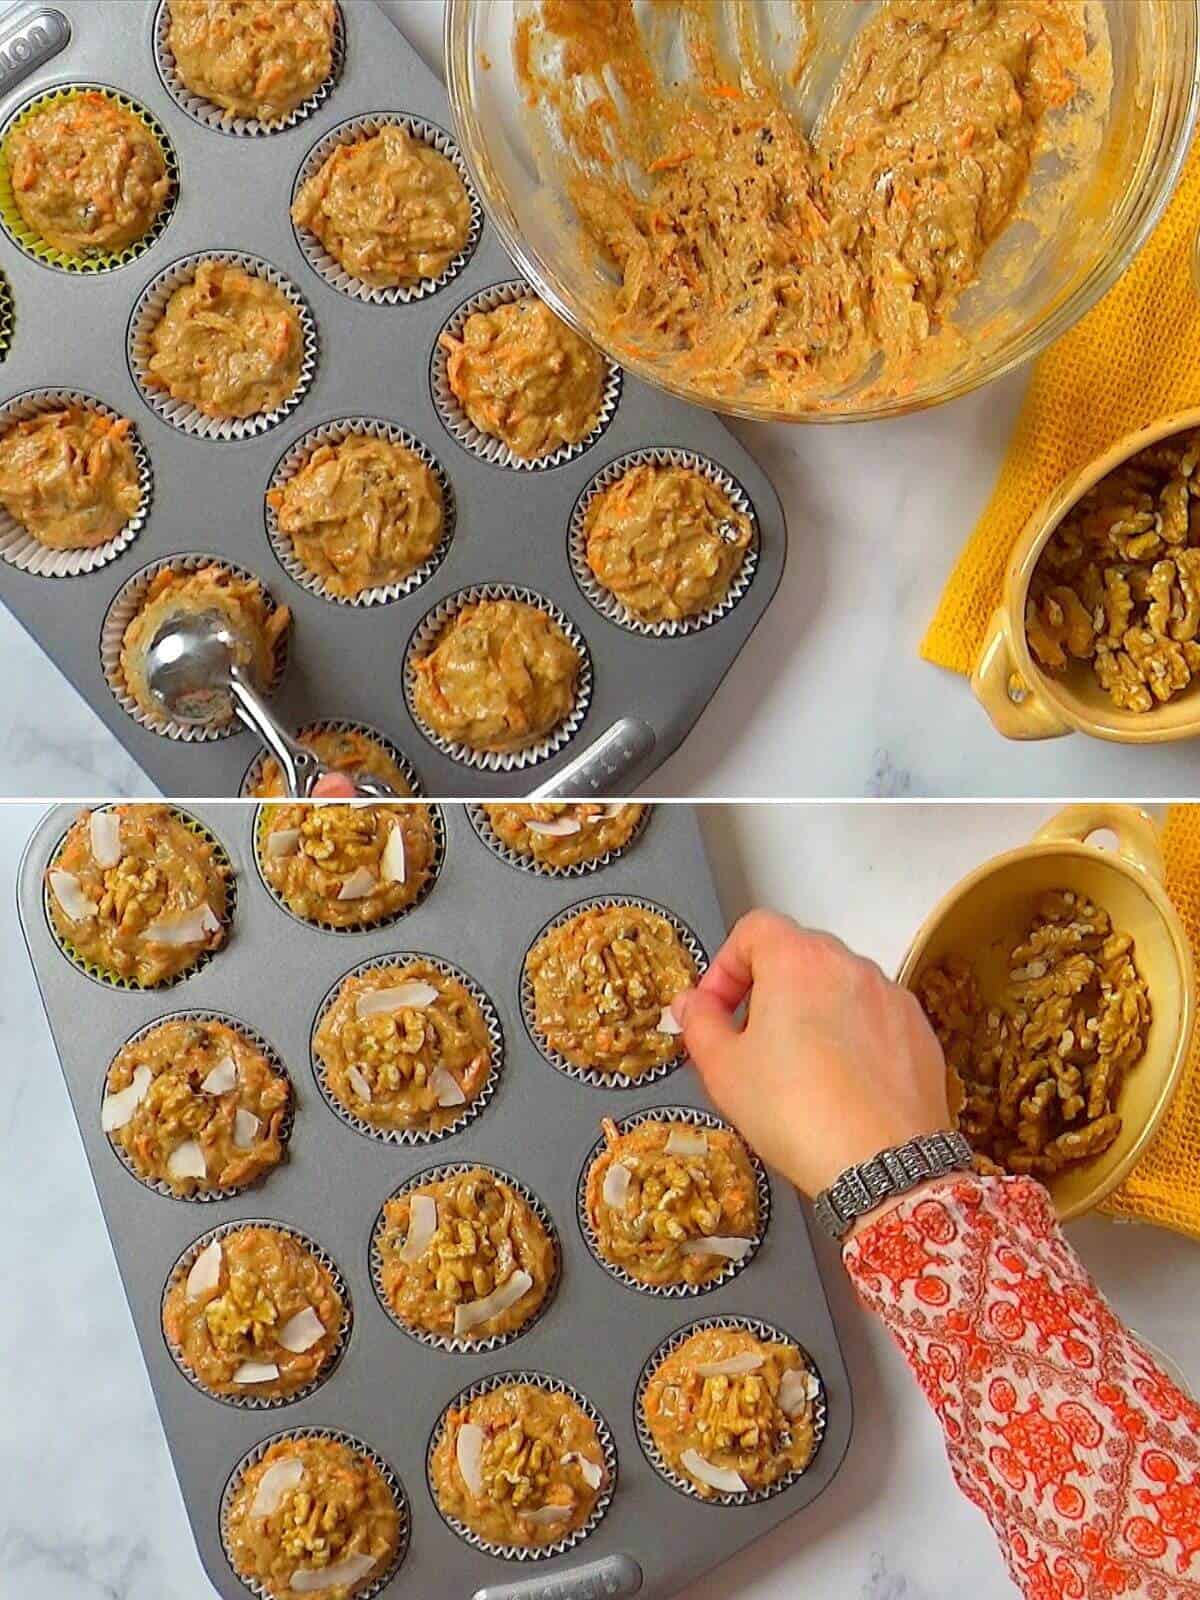 Filling the muffin pan with batter and adding the toppings.